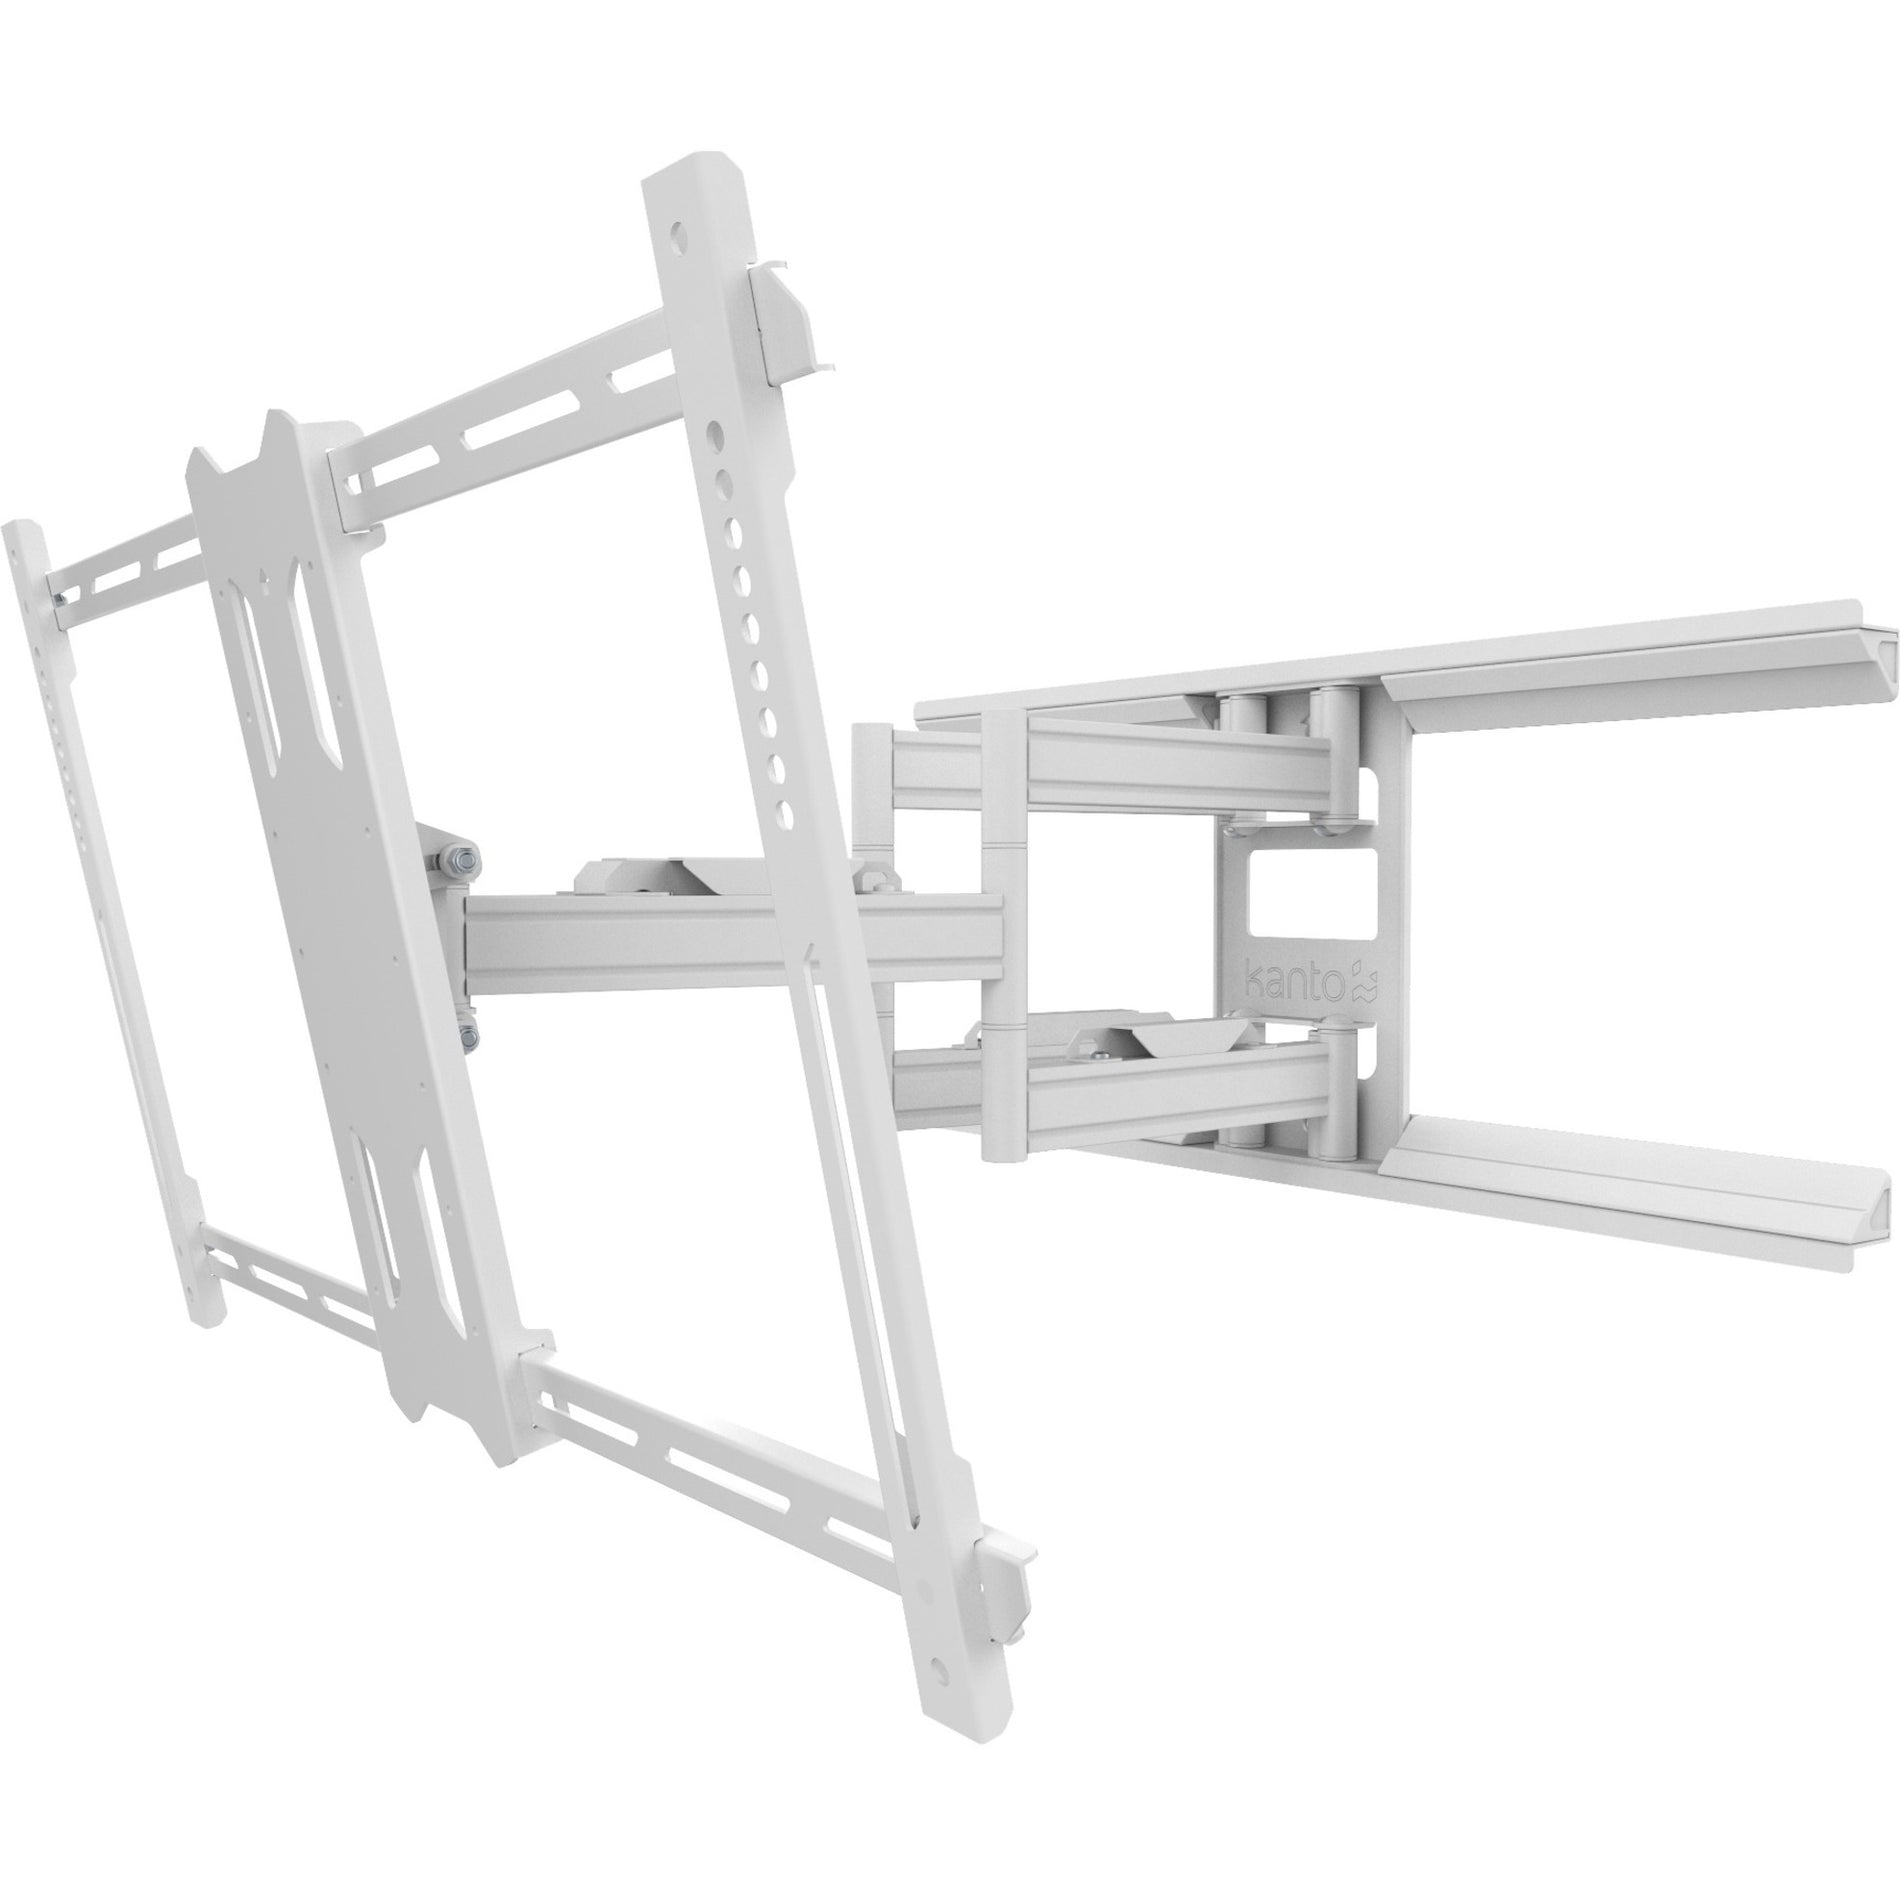 Kanto PDX680W Full Motion TV Wall Mount for 39-inch to 80-inch TVs - White [Discontinued]